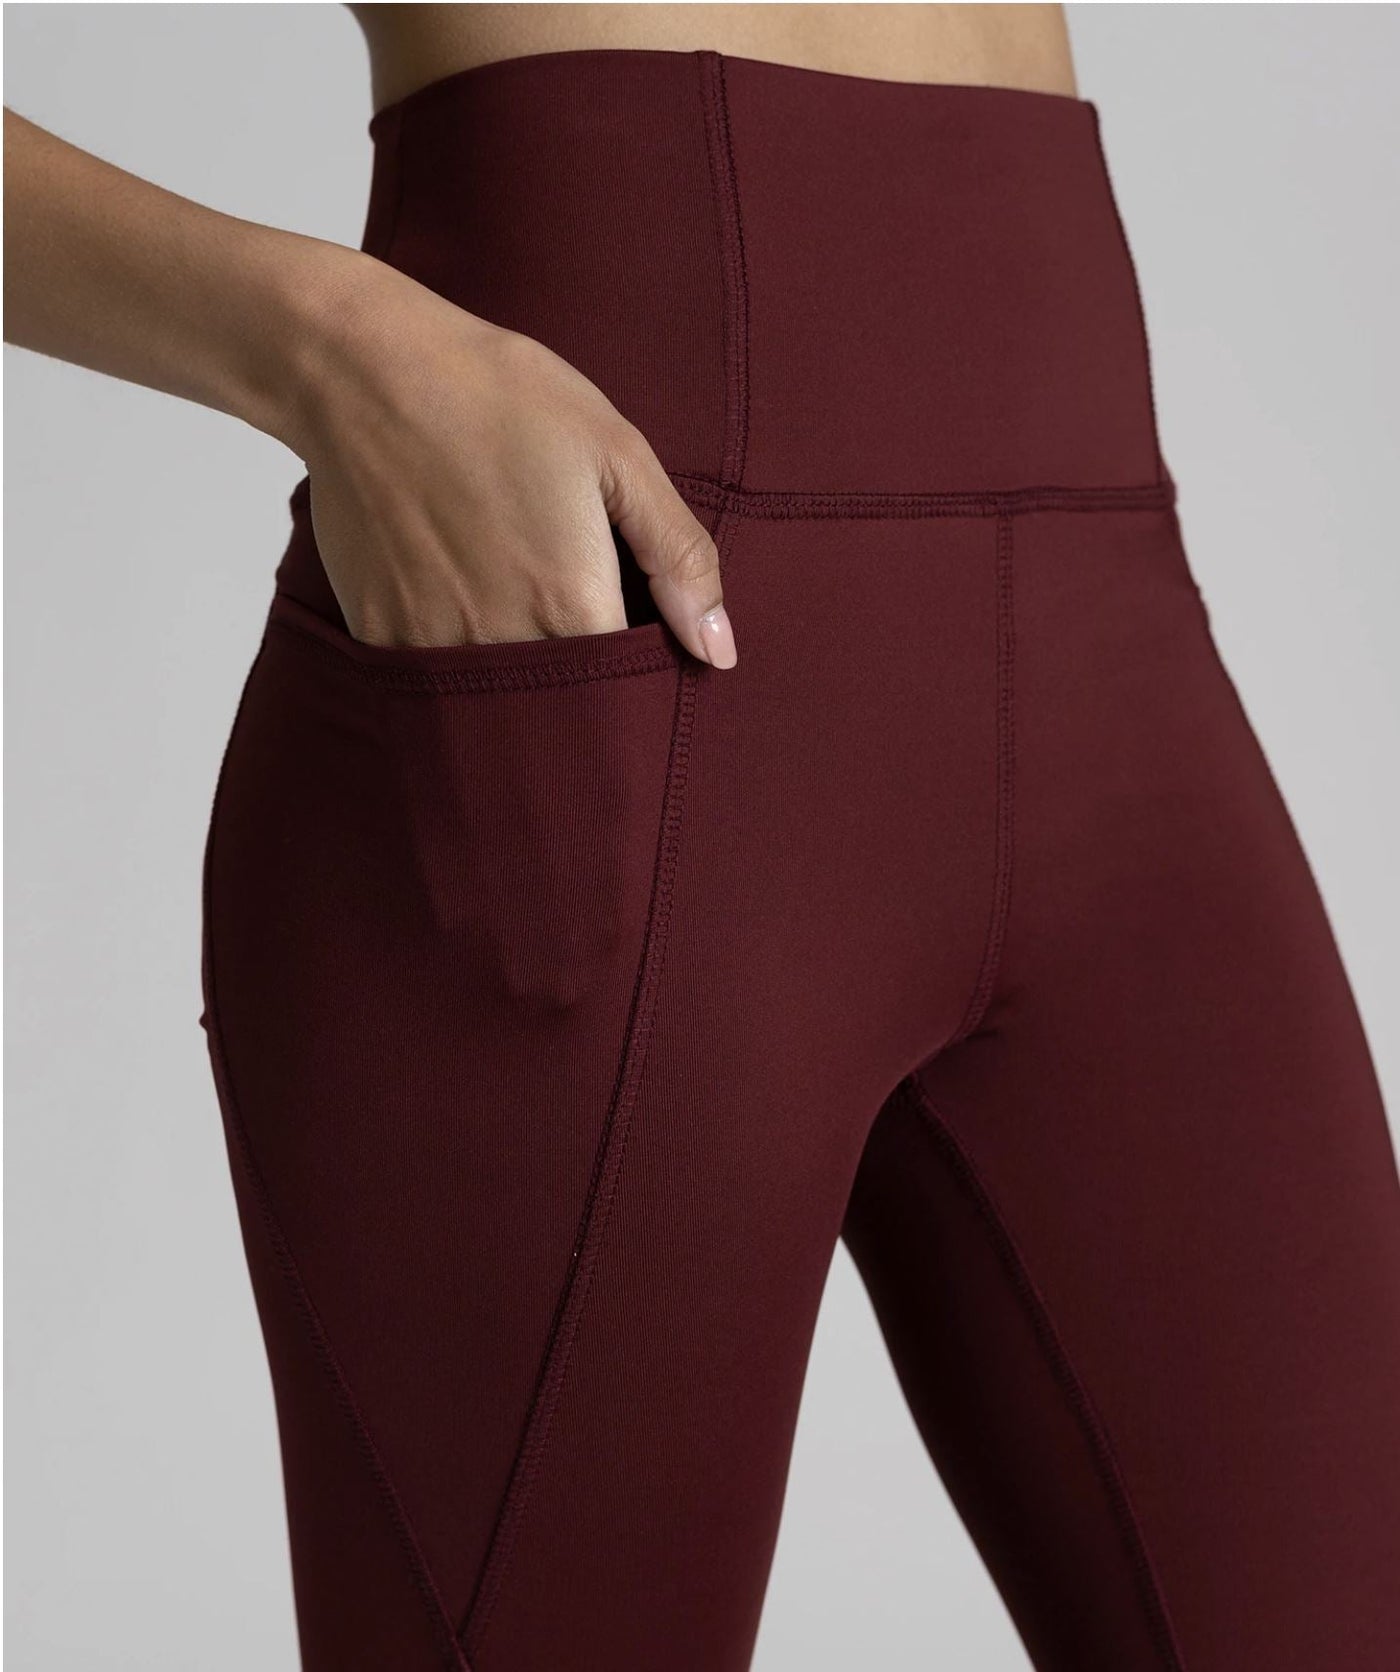 JALA Ladies High Waist High Performance Activewear Pocket Legging in Deep Red Perfect for Working Out | Made in USA | Women's Made in America Boutique